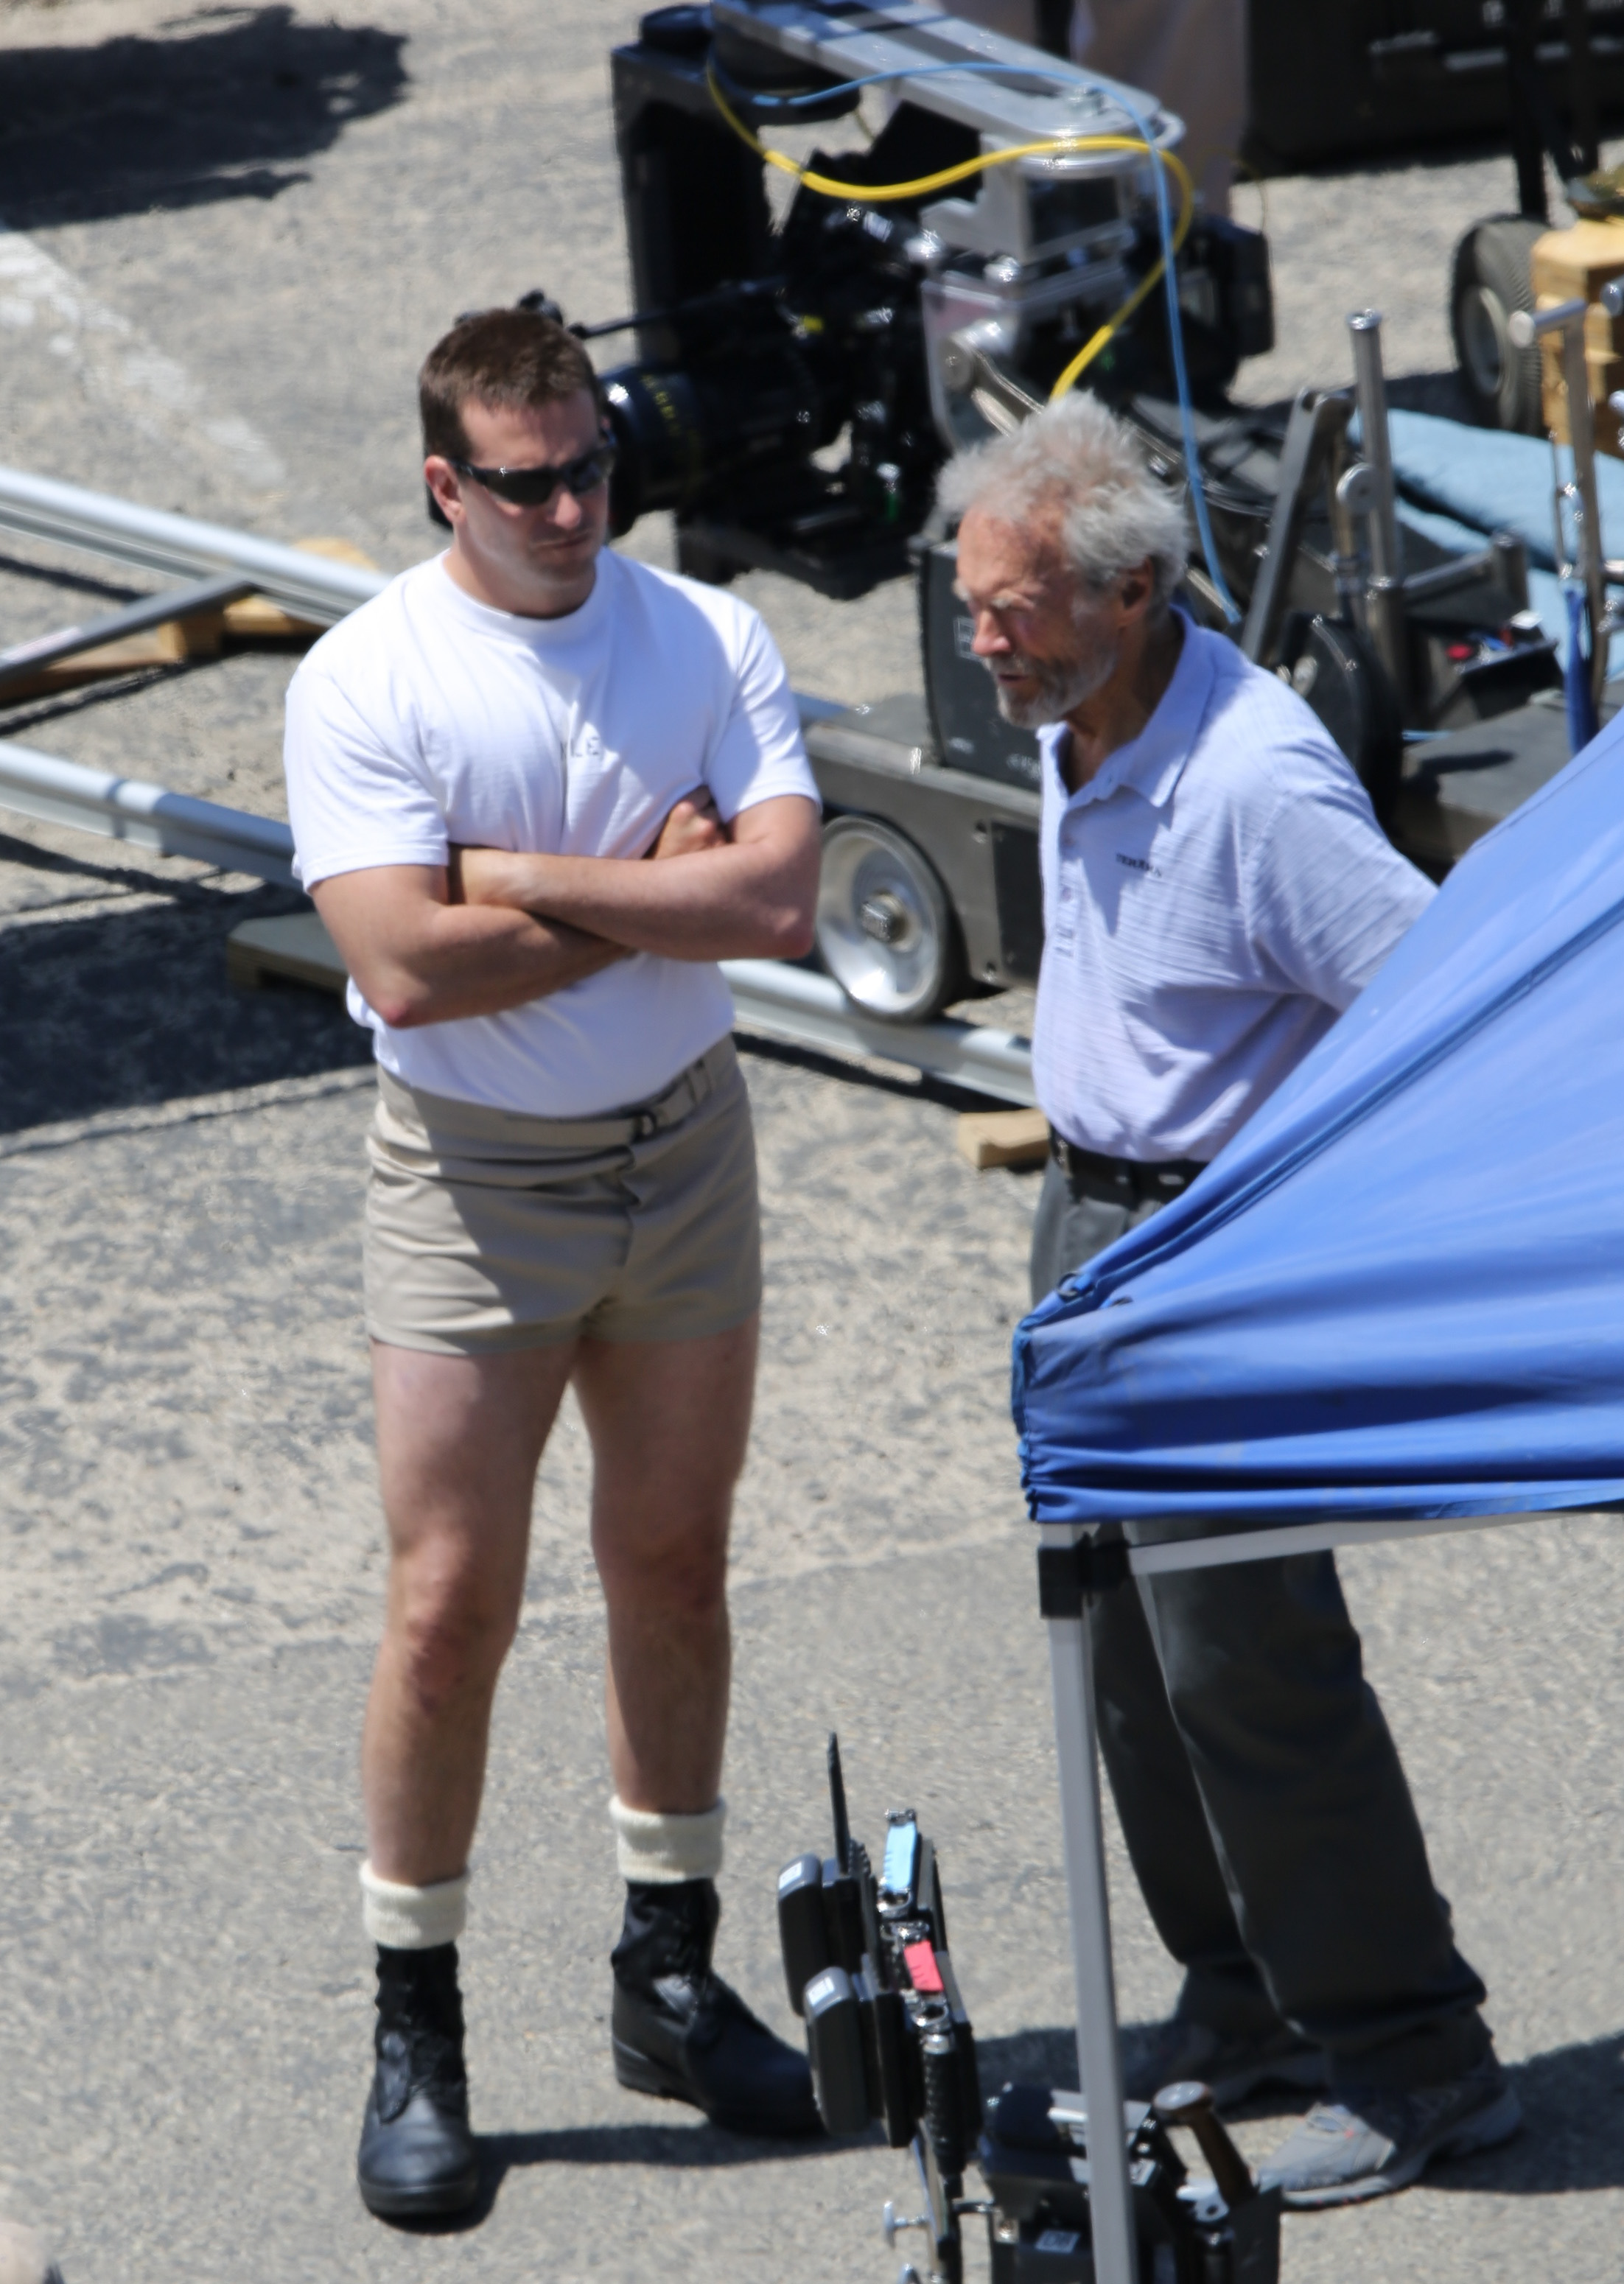 Bradley Cooper and Clint Eastwood on the set of 'American Sniper' in Malibu, California on June 4, 2014 in Los Angeles. (TSM/Bauer-Griffin/GC Images/Getty Images)